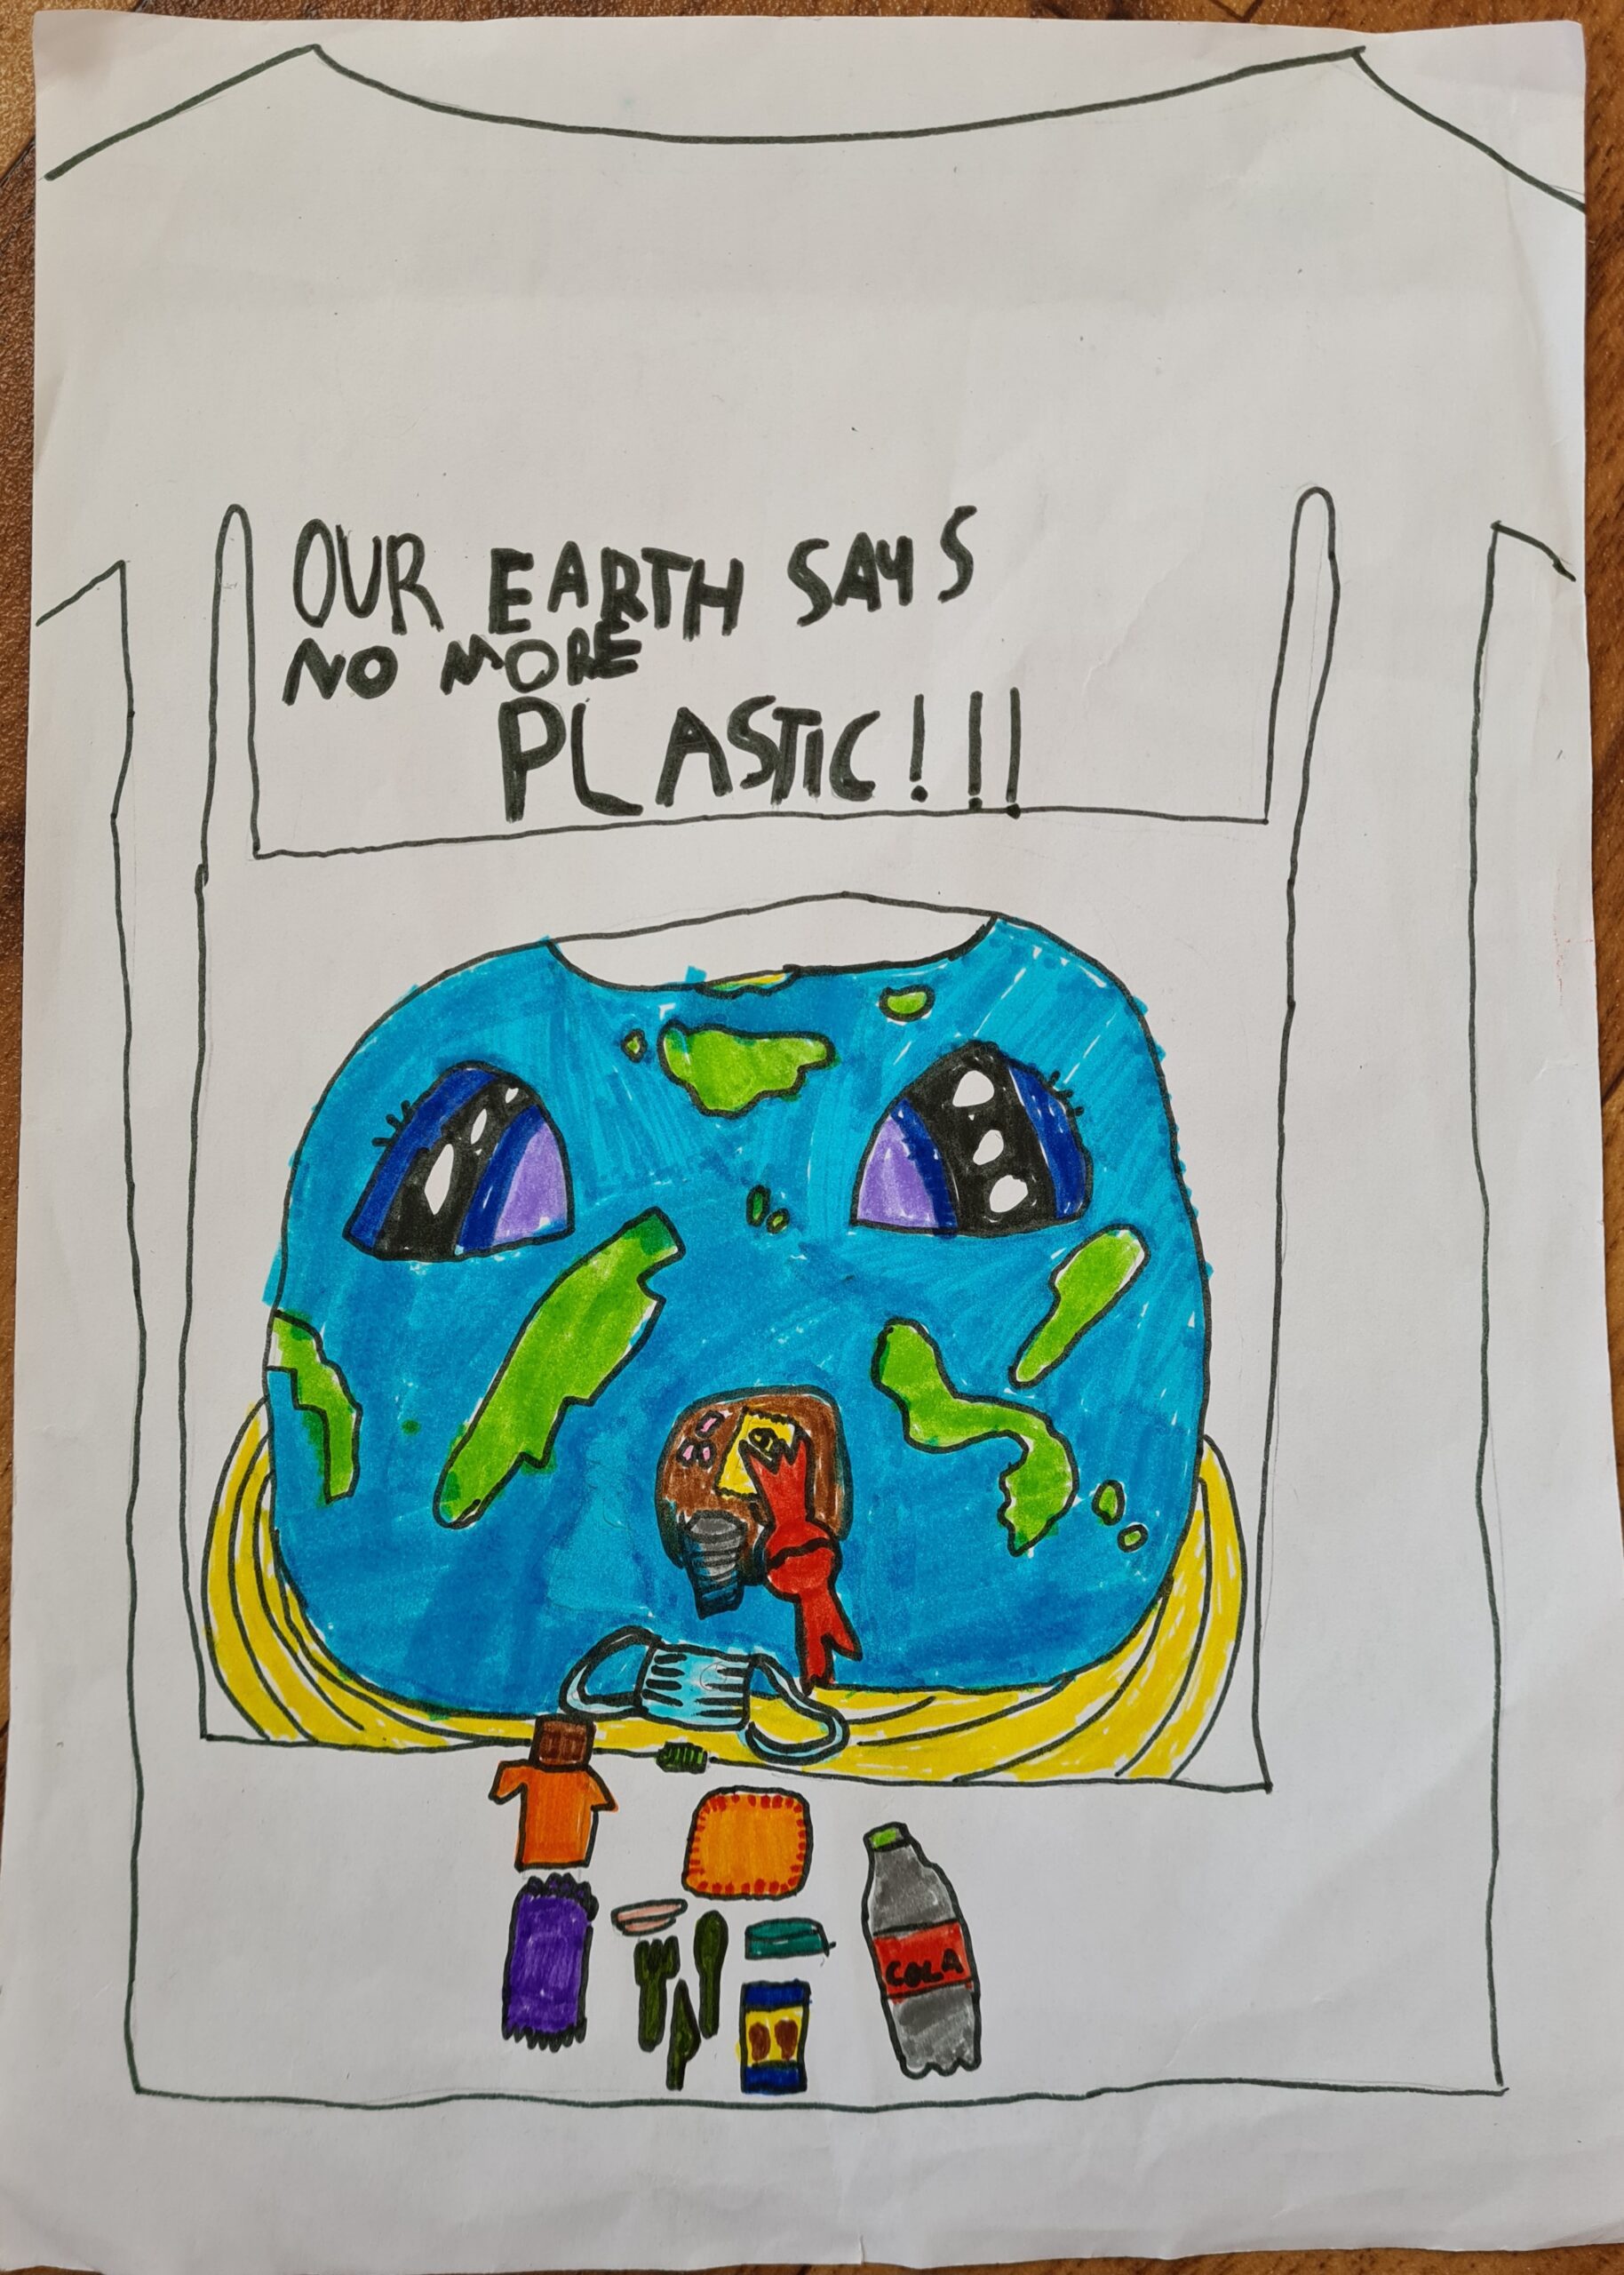 Child’s drawing showcasing the outline of a plastic bag with a drawing of the Earth inside and plastic pollution items such as a face mask, plastic bottle and cutlery. As well as a slogan reading ‘Our earth says no more plastic!!!’